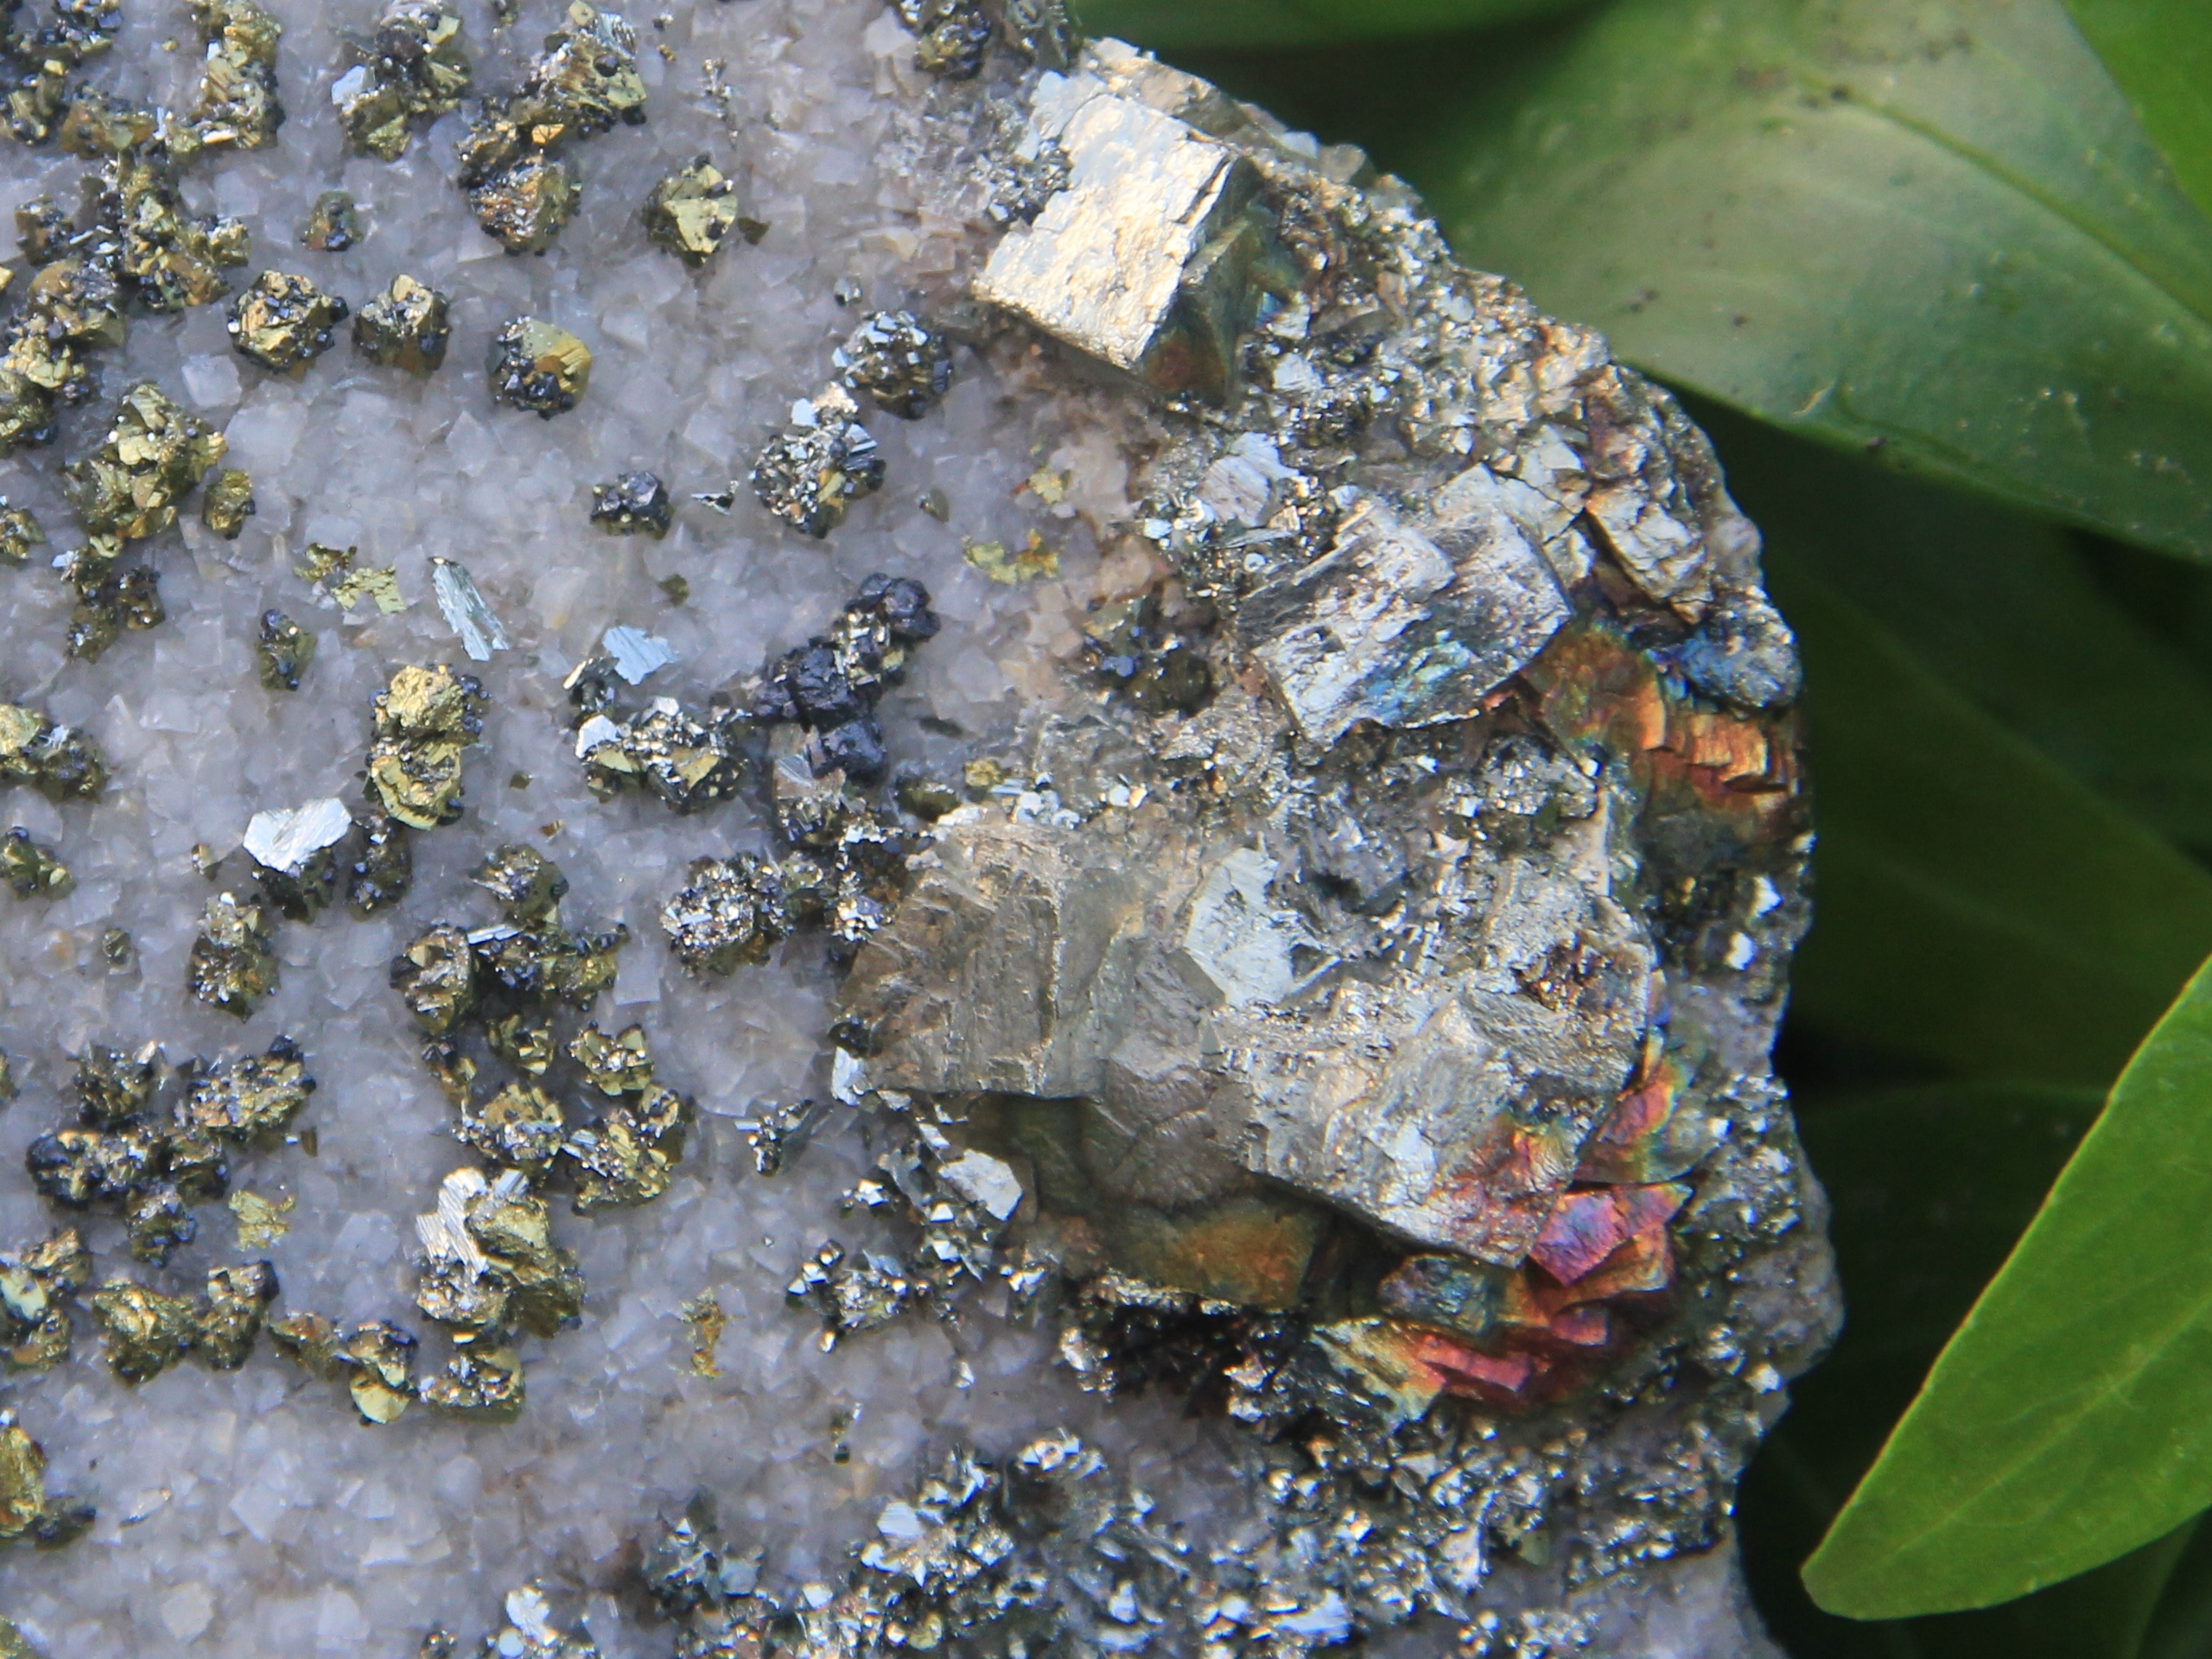 Marcasite, pyrite, and chalcopyrite crystals